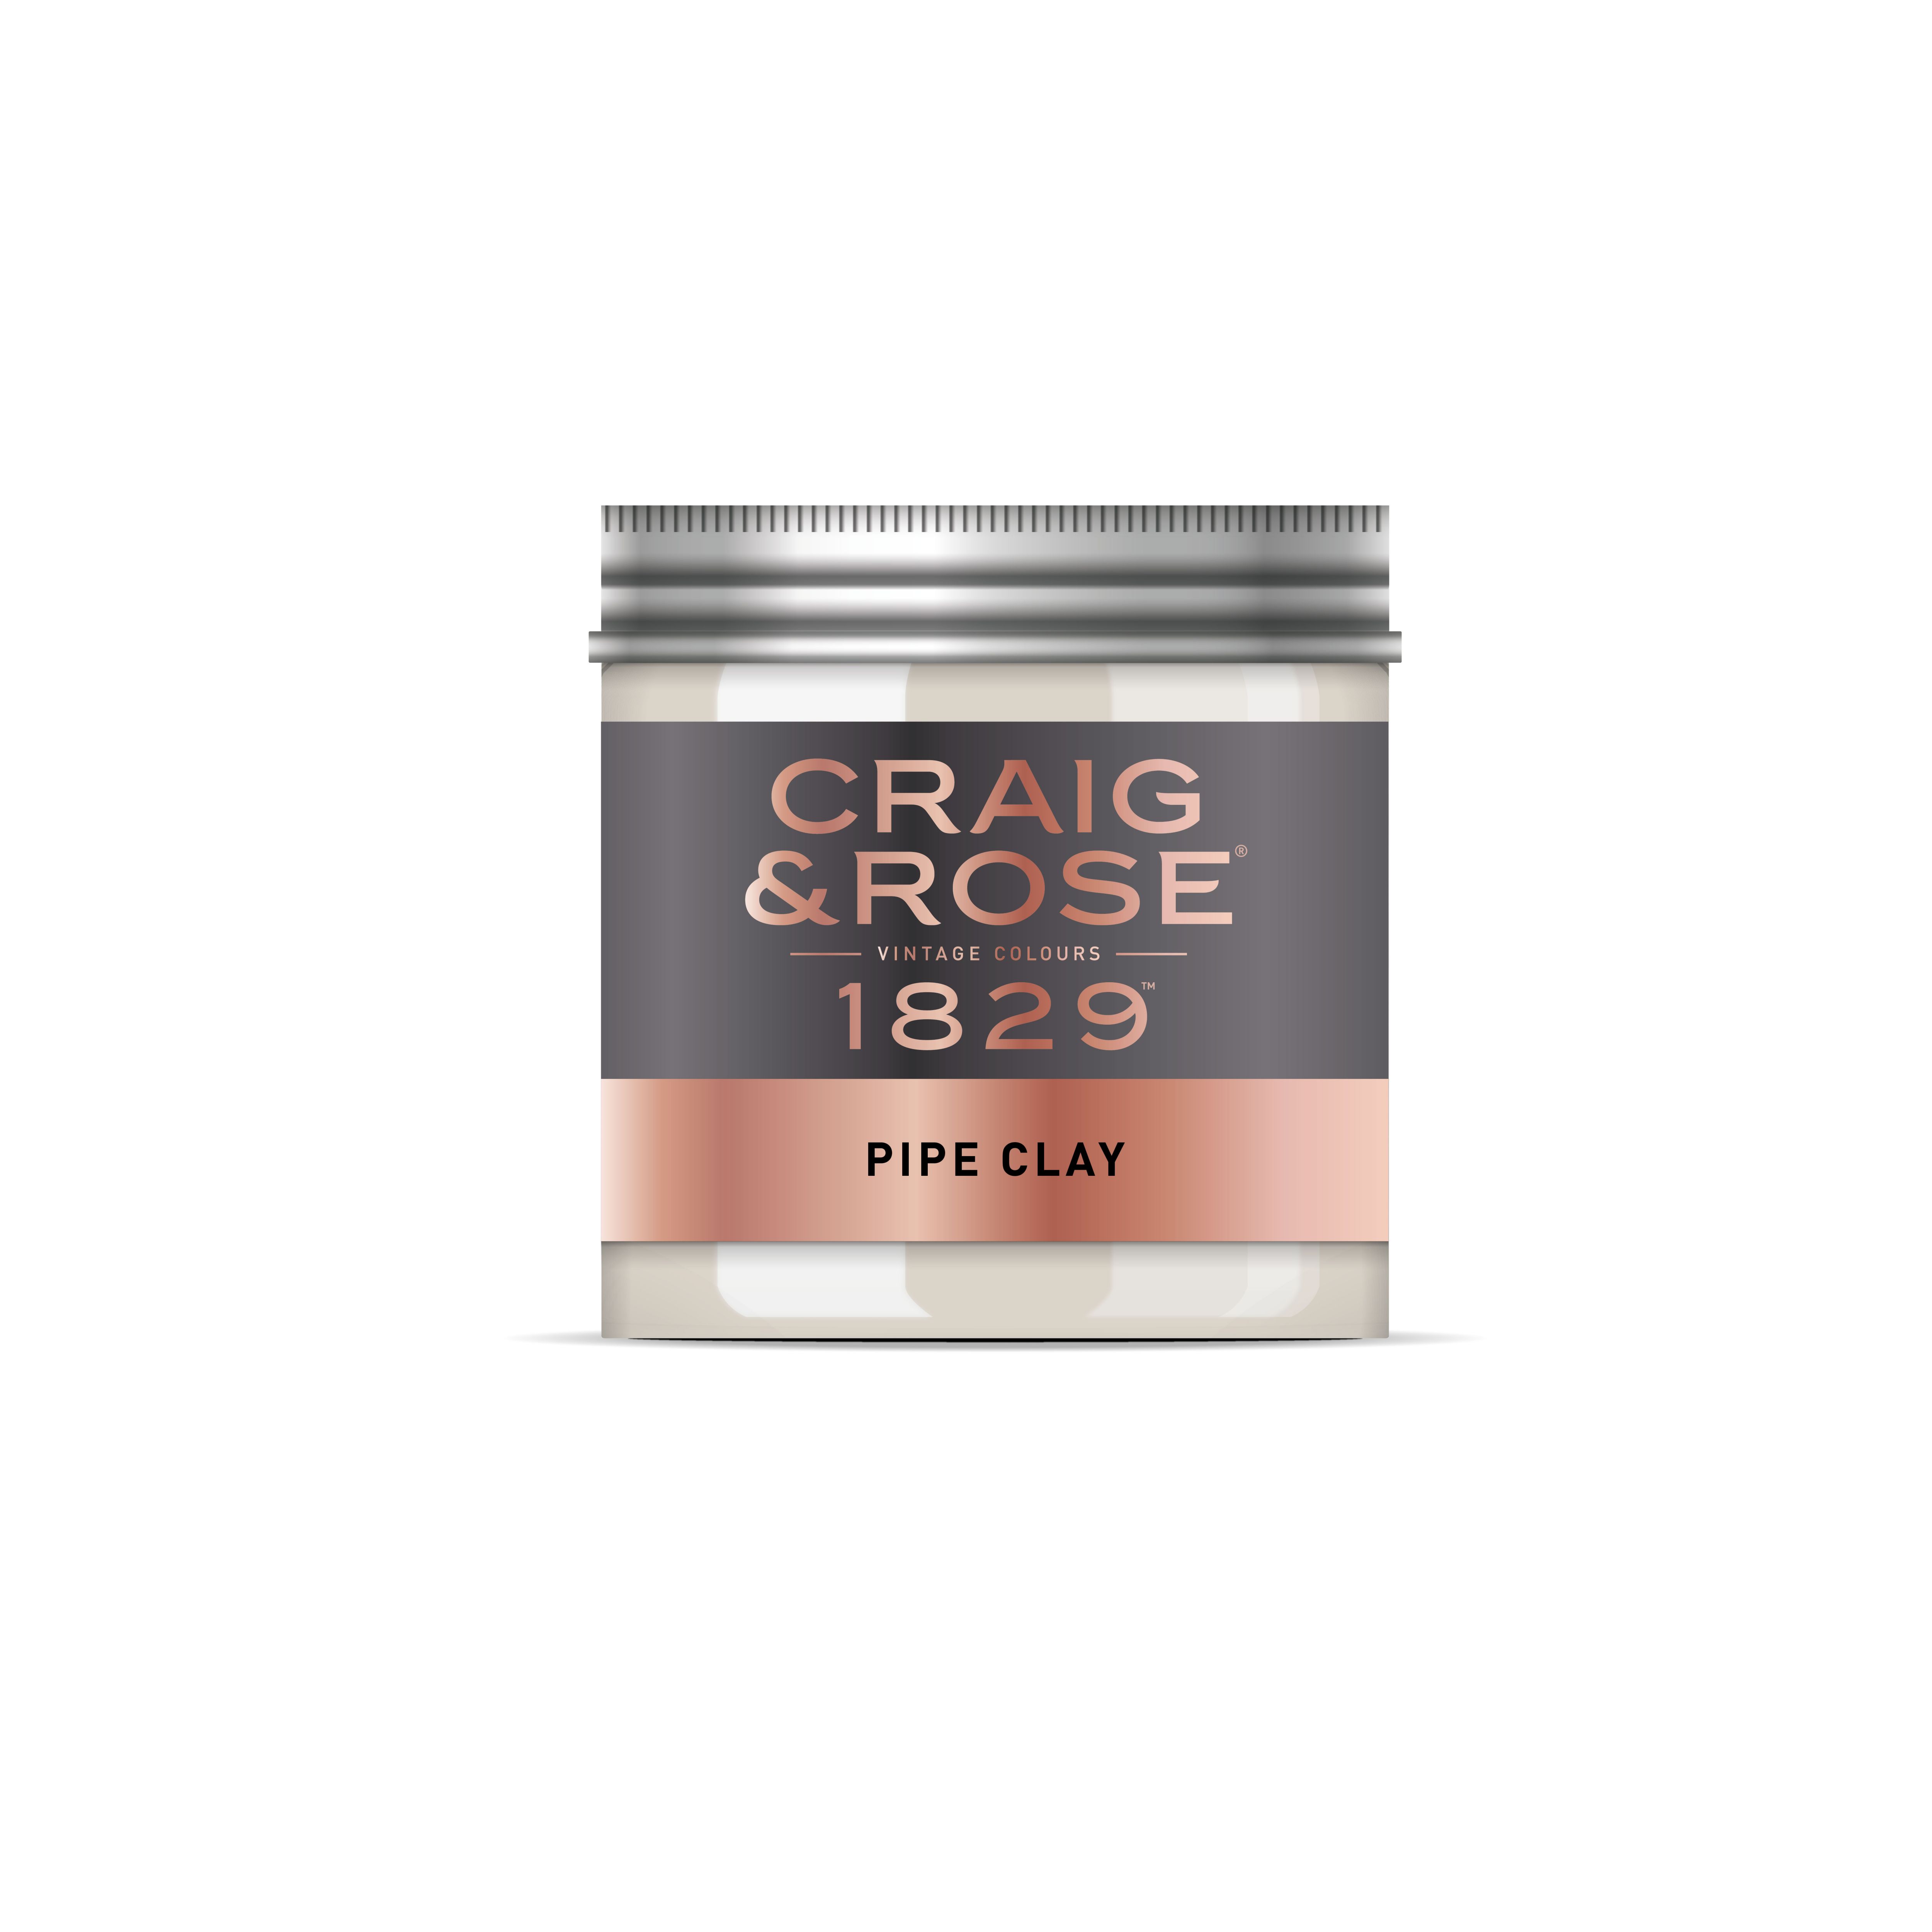 Craig & Rose 1829 Pipe Clay Chalky Emulsion paint, 50ml